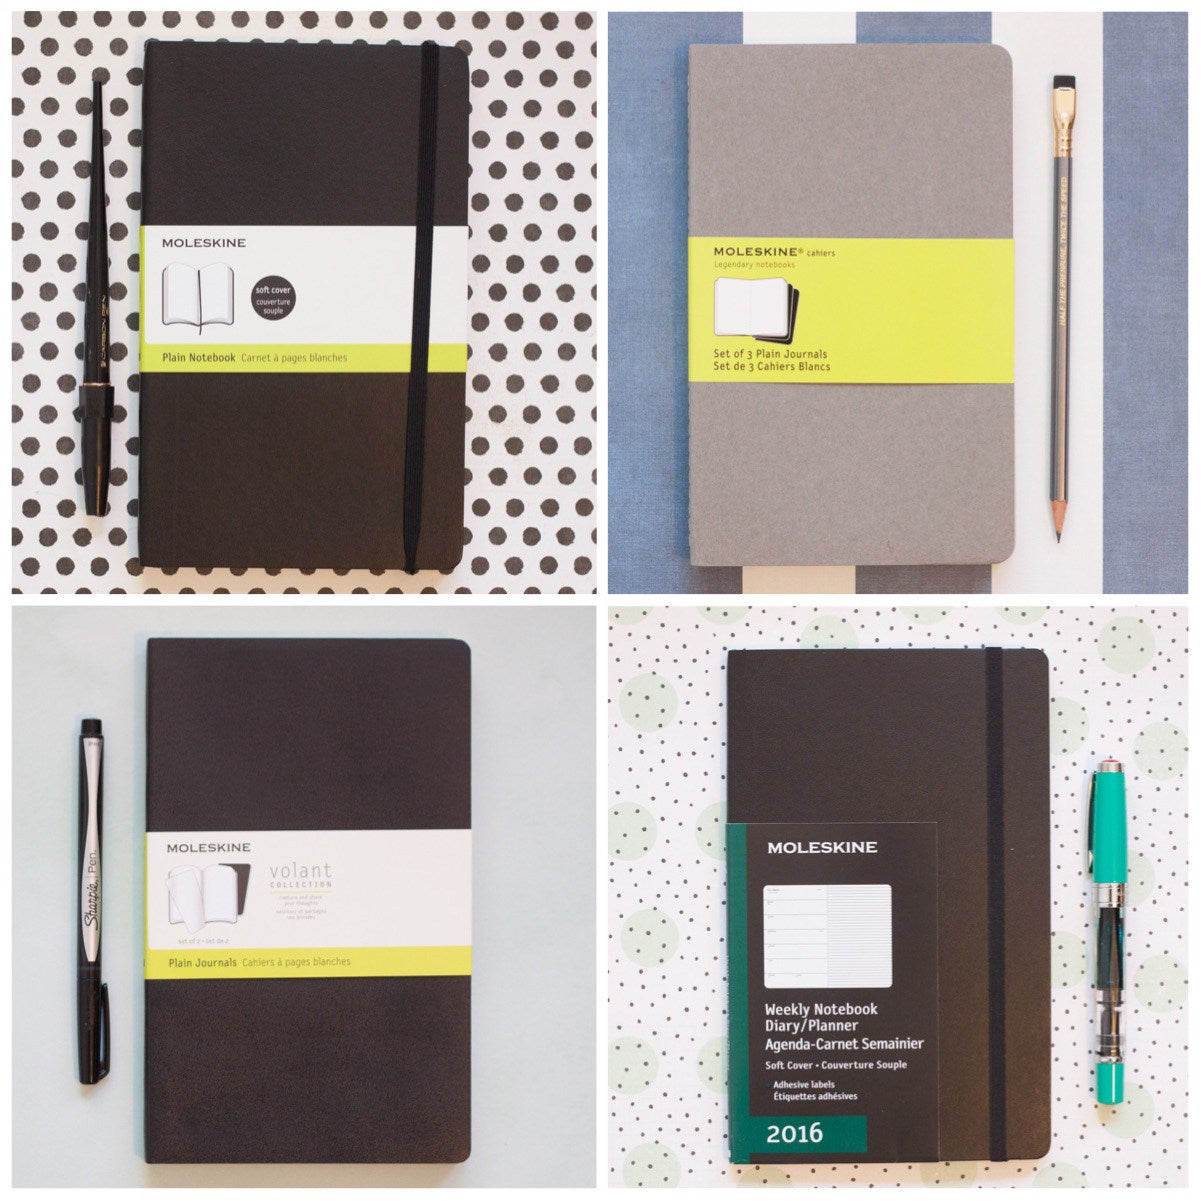 Pencil Review: Moleskine Drawing Pencils - The Well-Appointed Desk